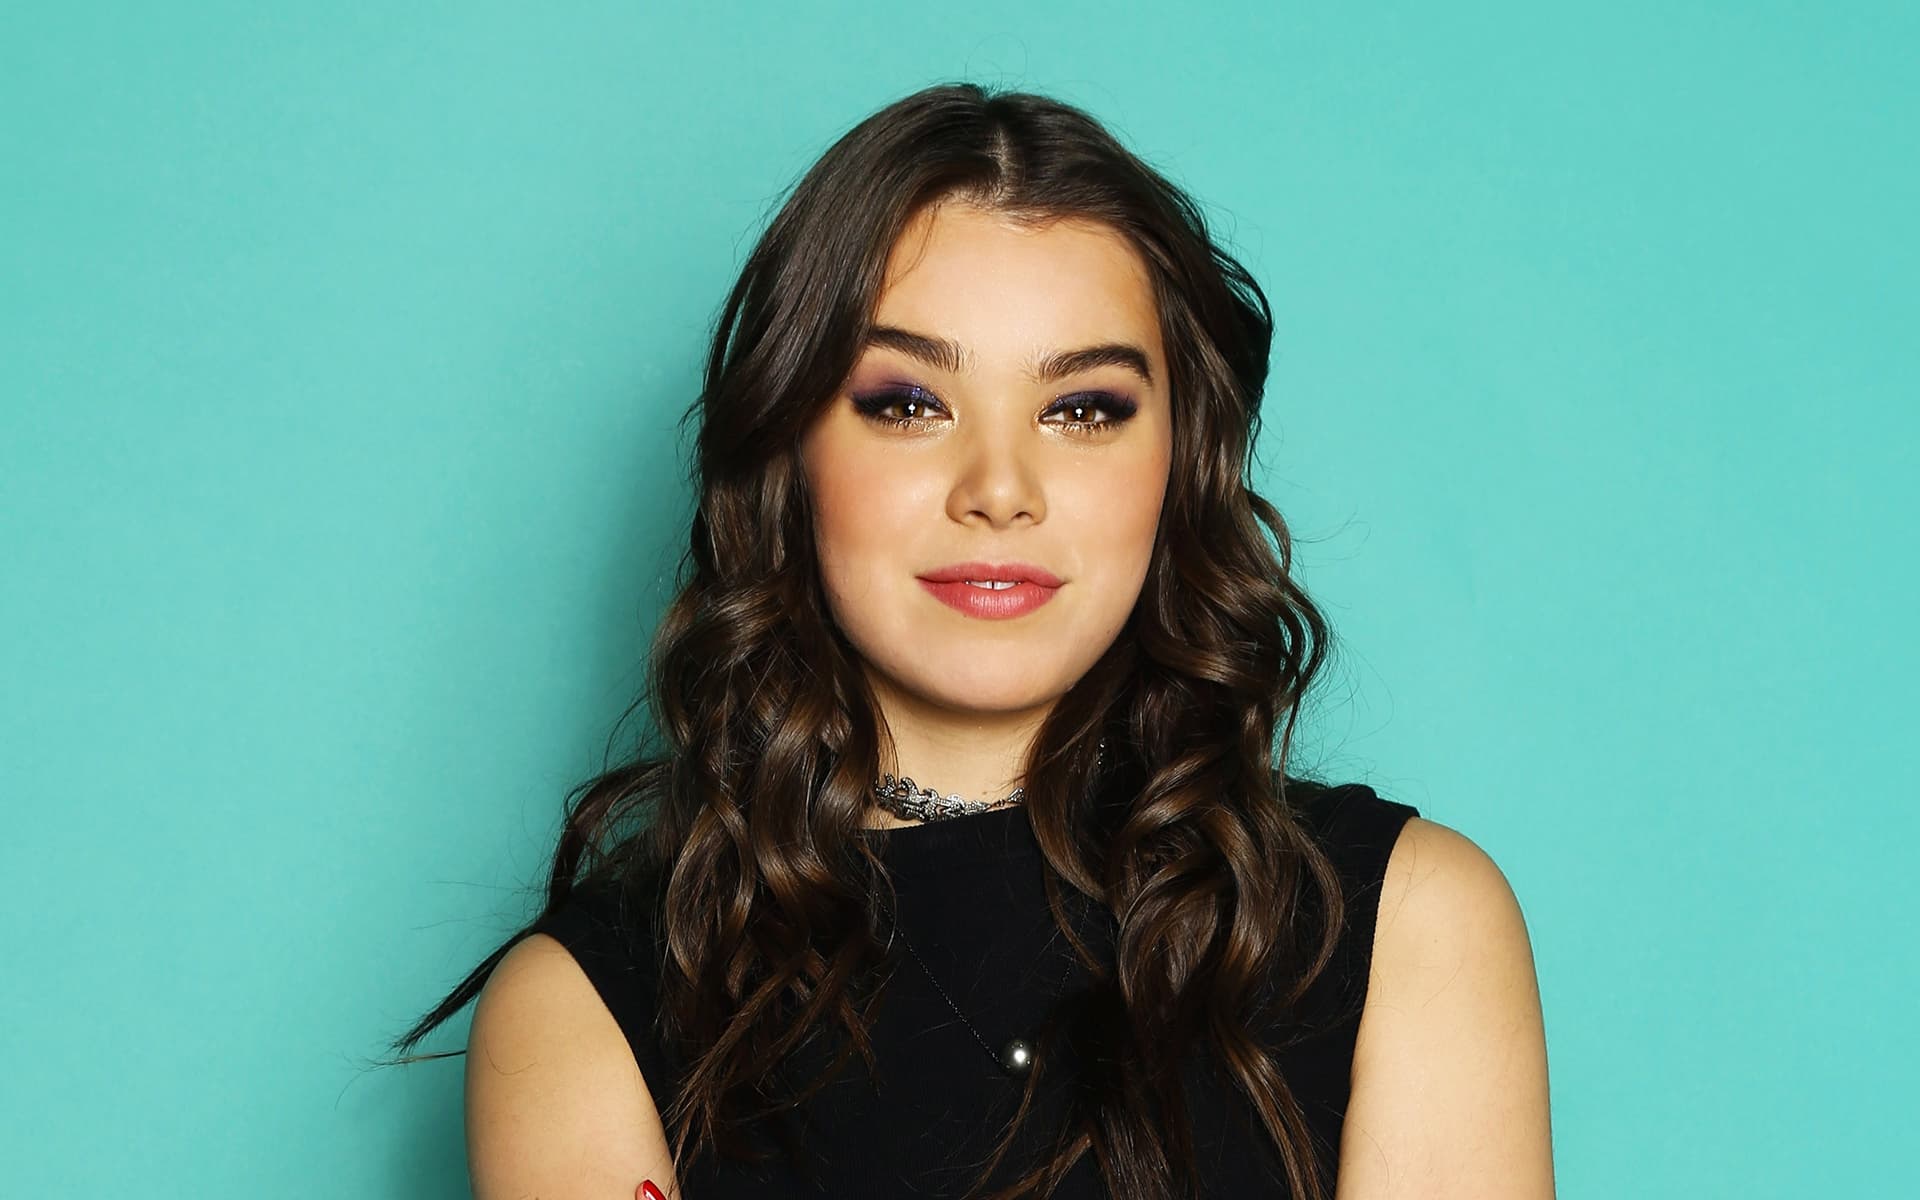 Hailee Steinfeld wallpaper High Quality Resolution Download